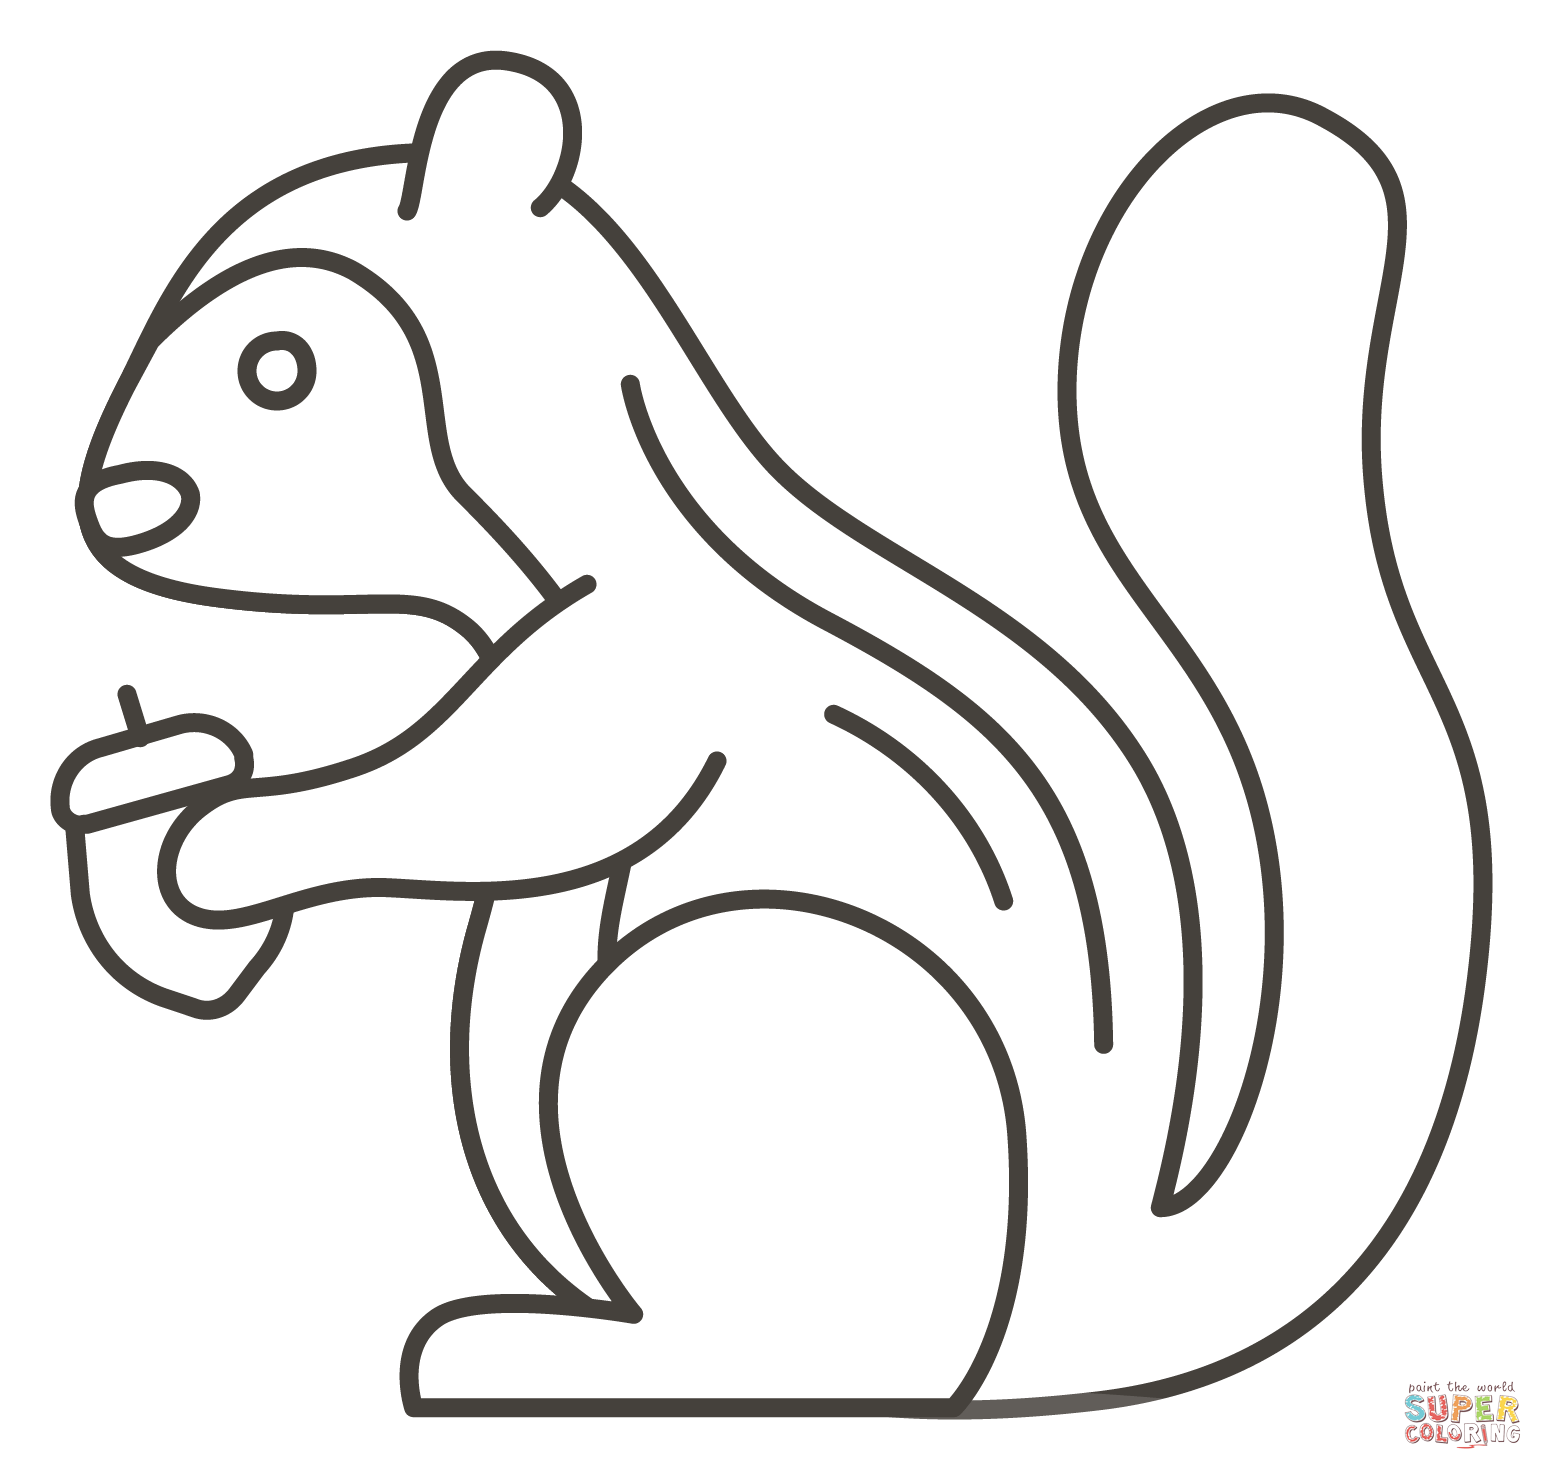 Chipmunk coloring page free printable coloring pages